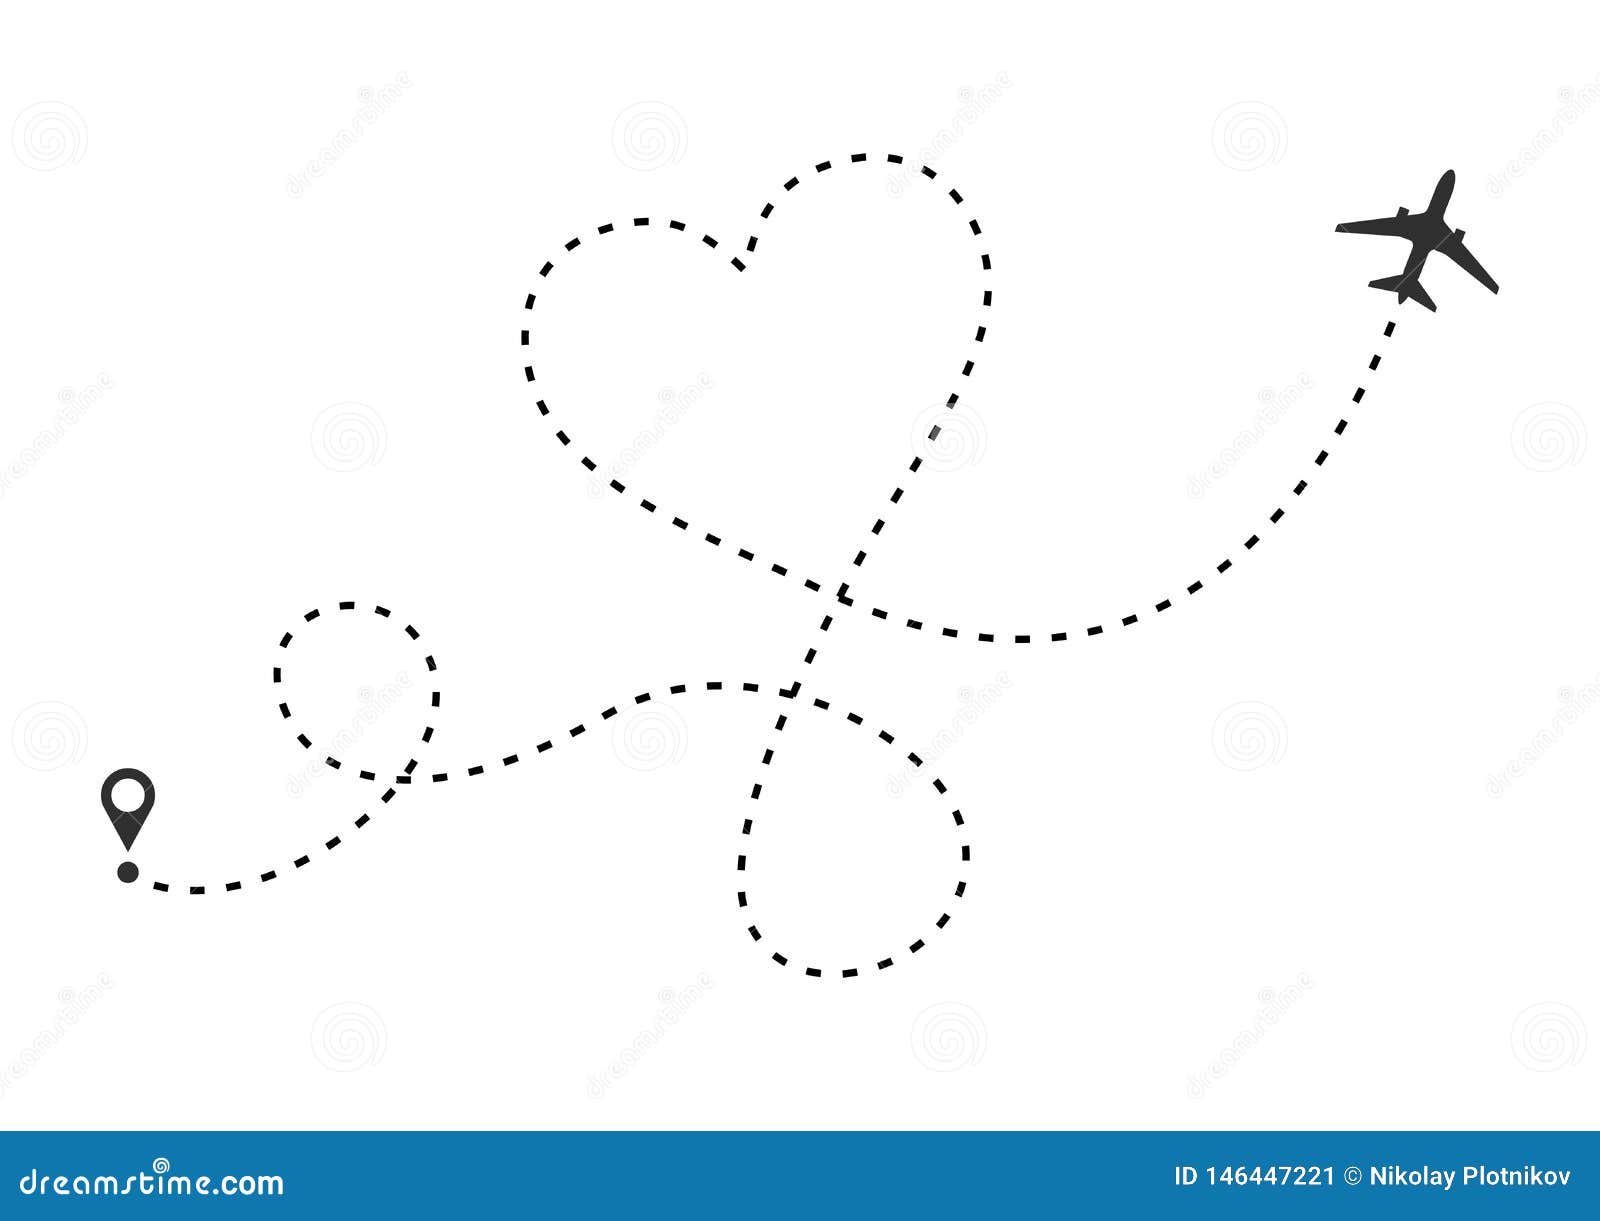 love airplane route. heart dashed line trace and plane routes  on white background. romantic wedding travel